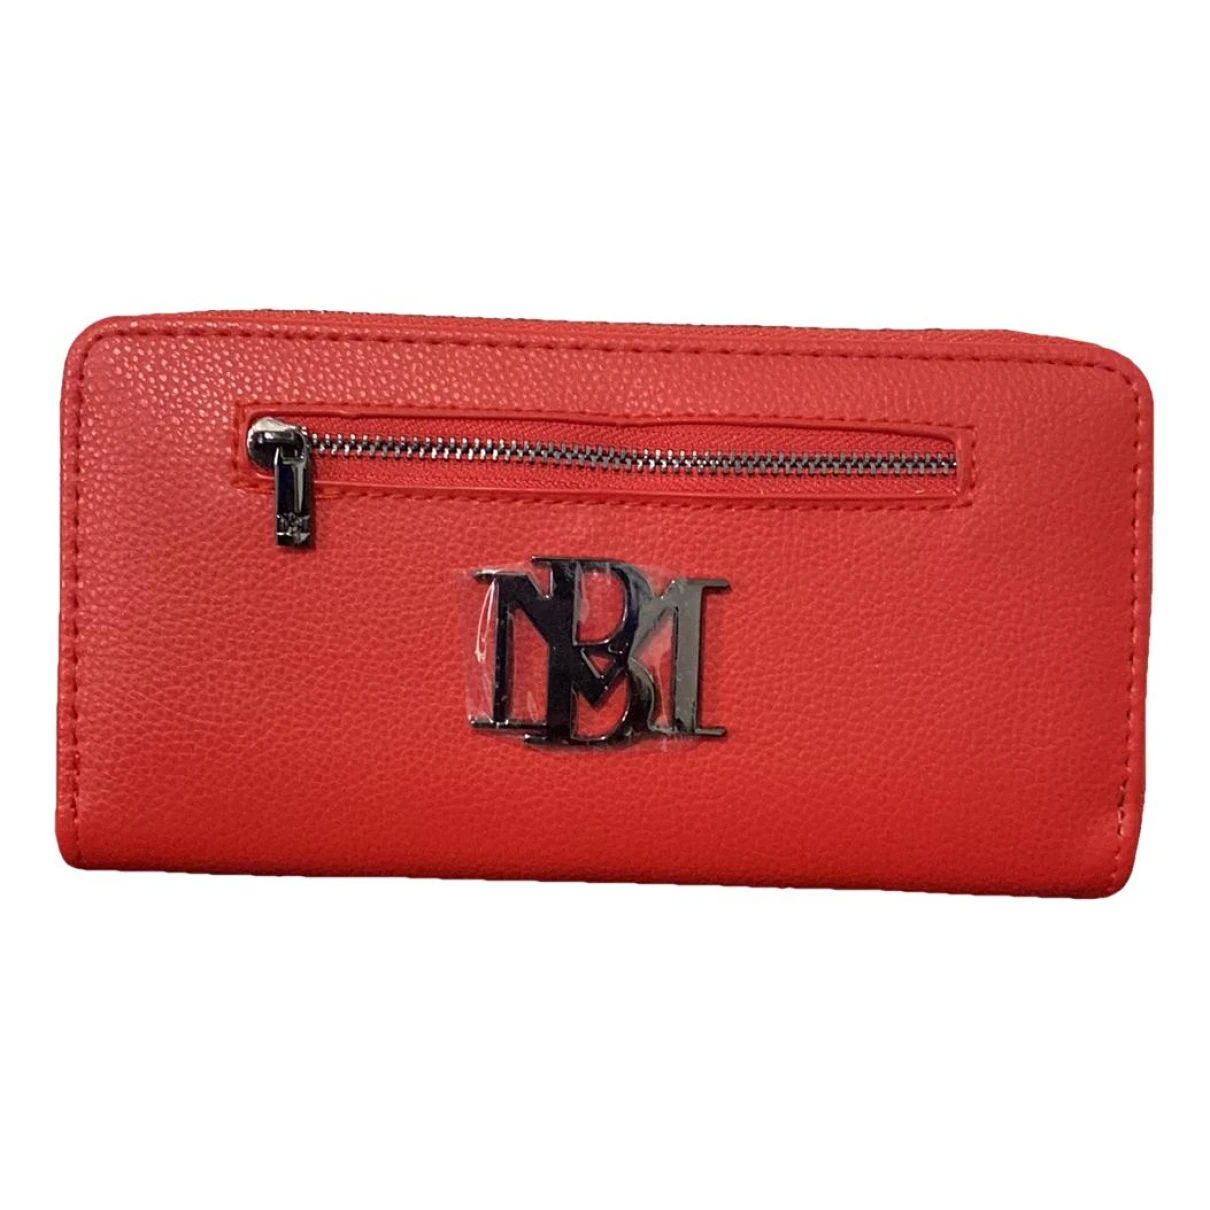 Pre-owned Badgley Mischka Vegan Leather Wallet In Red